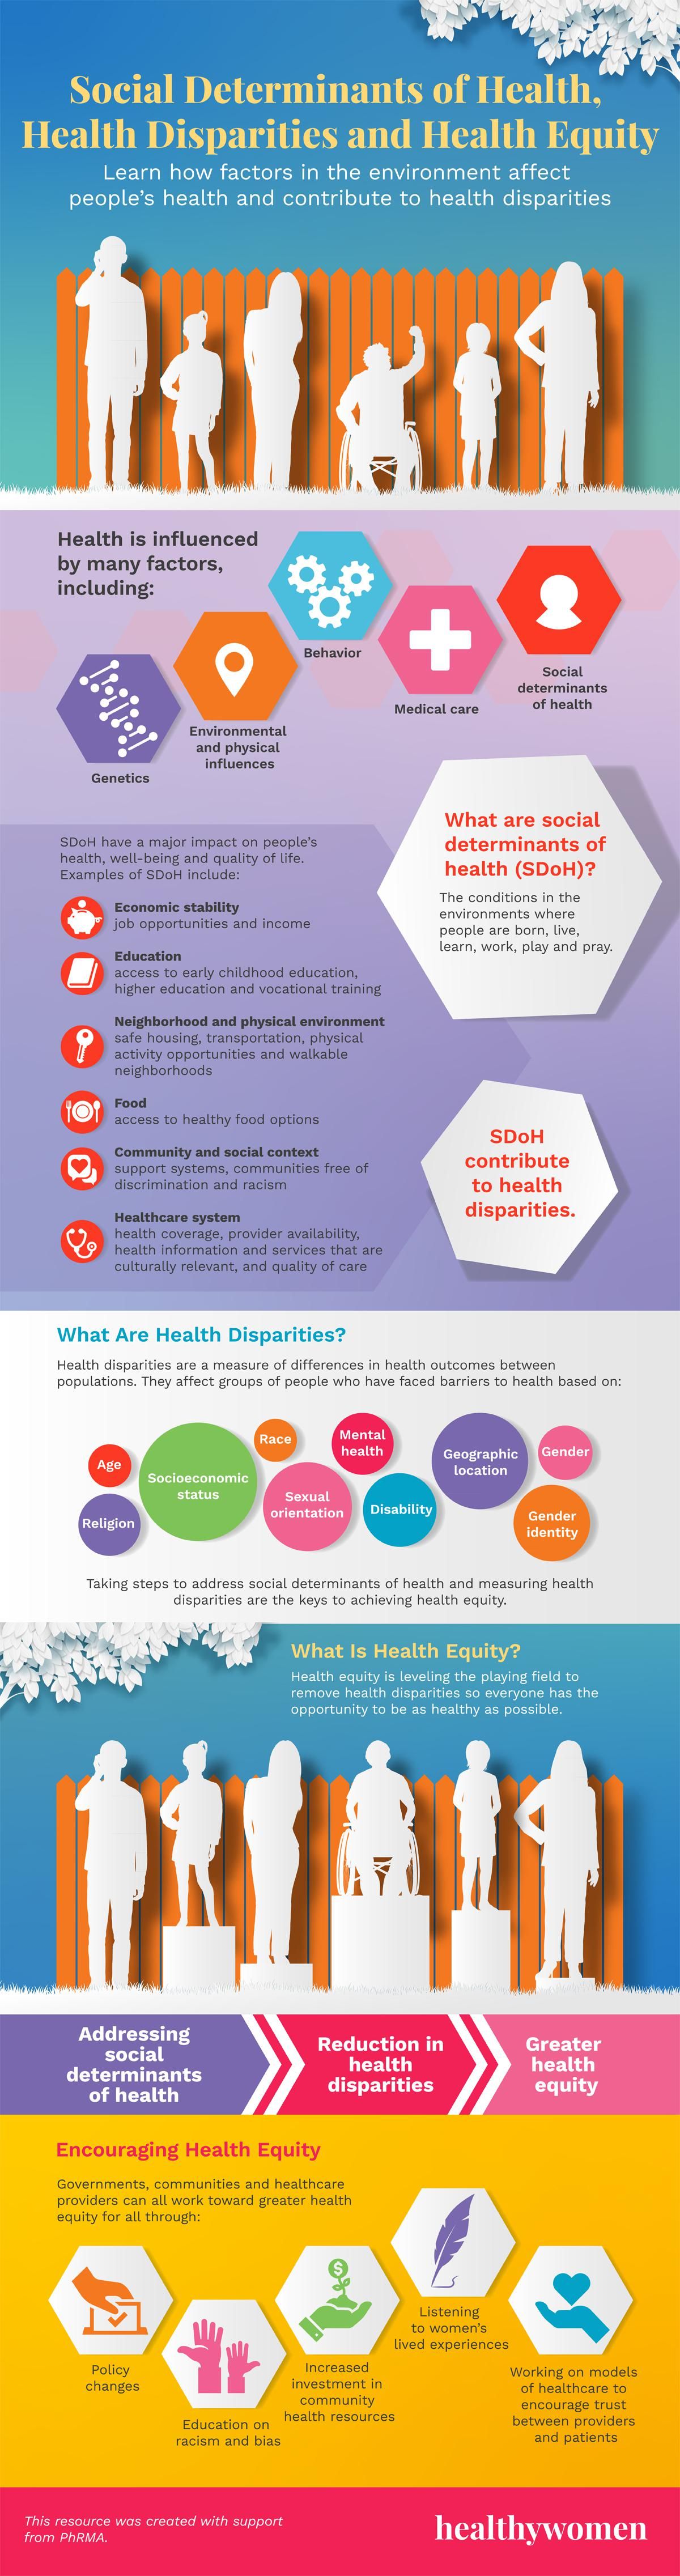 Infographic Social Determinants of Health, Health Disparities and Health Equity. Click the image to open the PDF